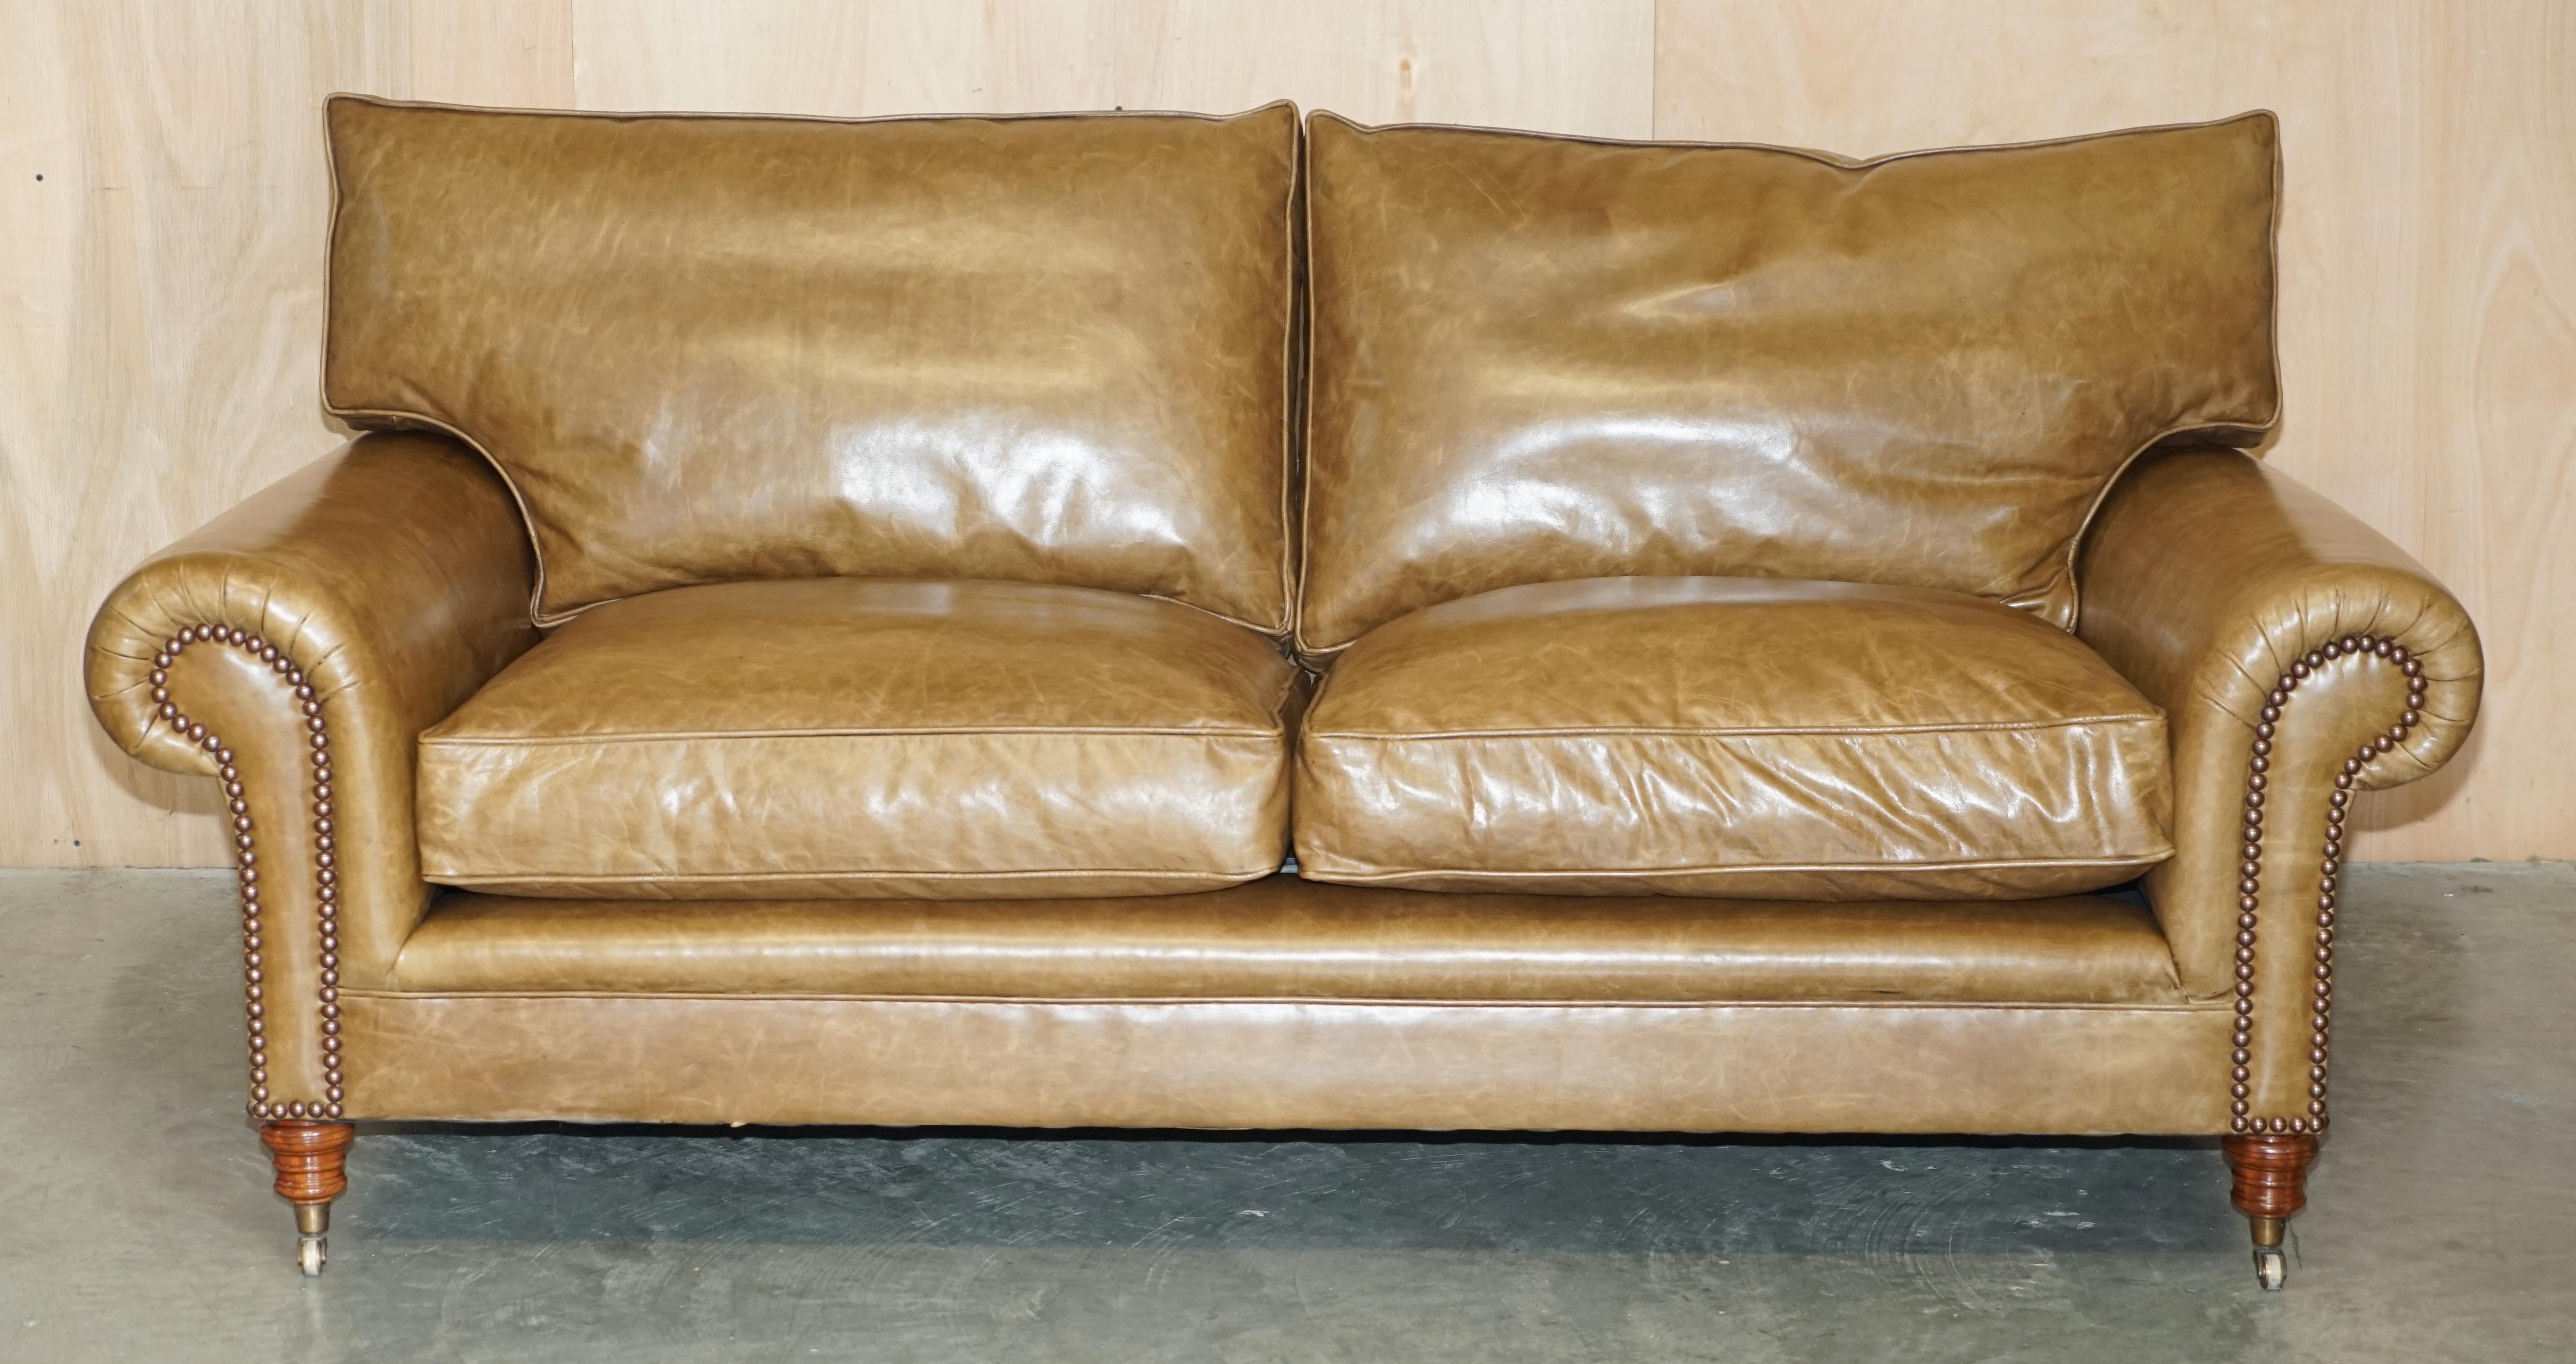 Royal House Antiques

Royal House Antiques is delighted to offer for sale this absolutely exquisite RRP £19,140 George Smith Chelsea Signature full scroll arm, cushion back brown leather sofa

Please note the delivery fee listed is just a guide, it